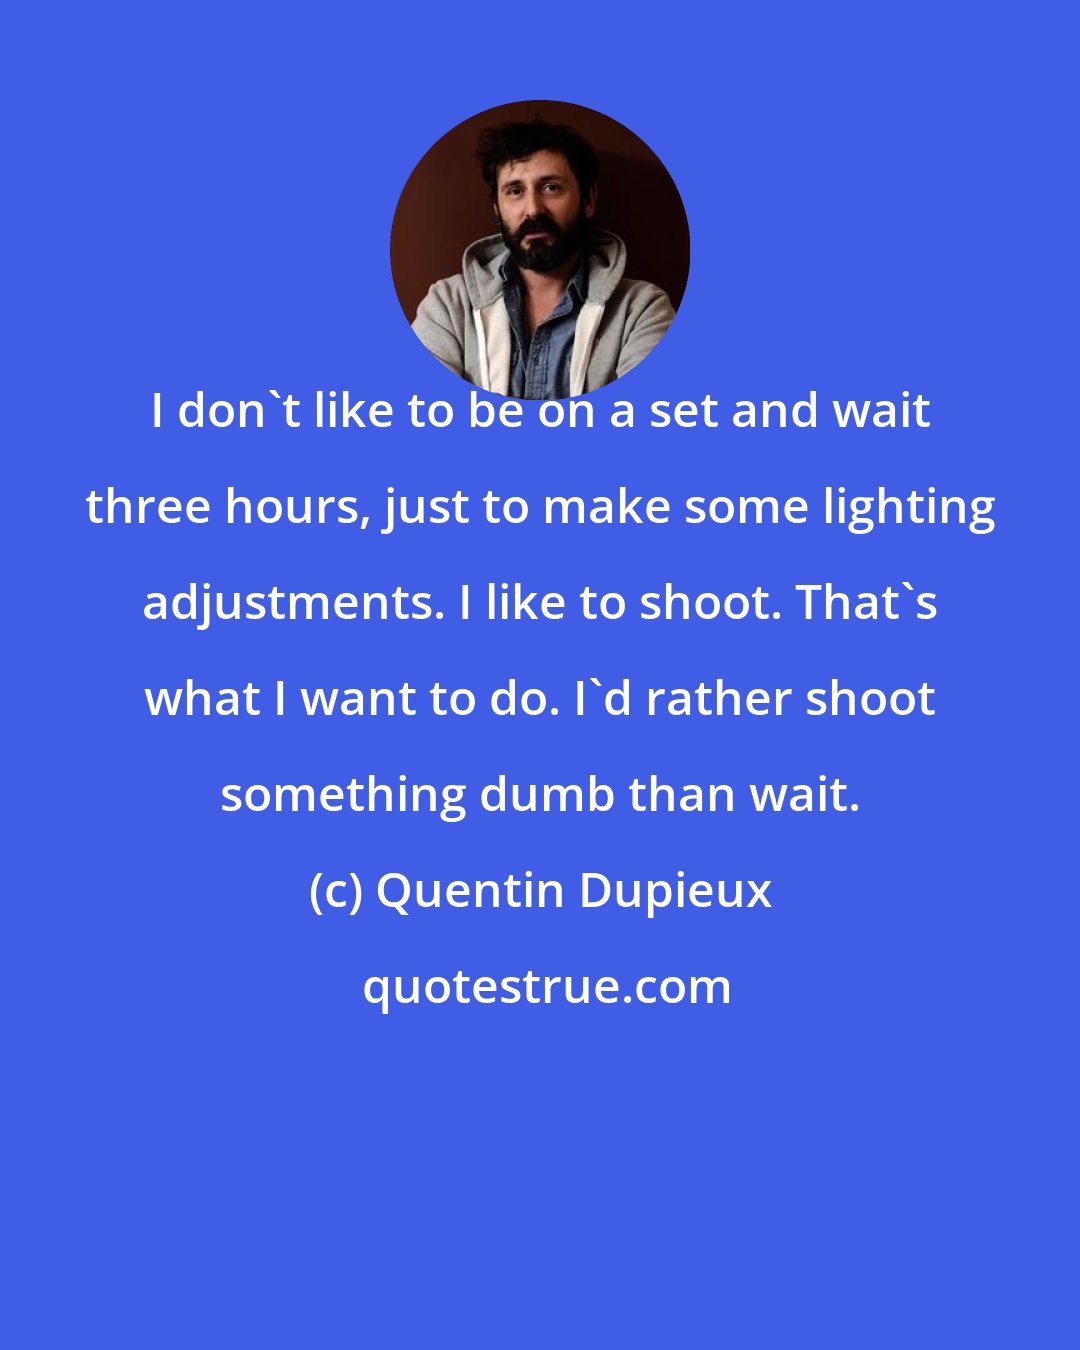 Quentin Dupieux: I don't like to be on a set and wait three hours, just to make some lighting adjustments. I like to shoot. That's what I want to do. I'd rather shoot something dumb than wait.